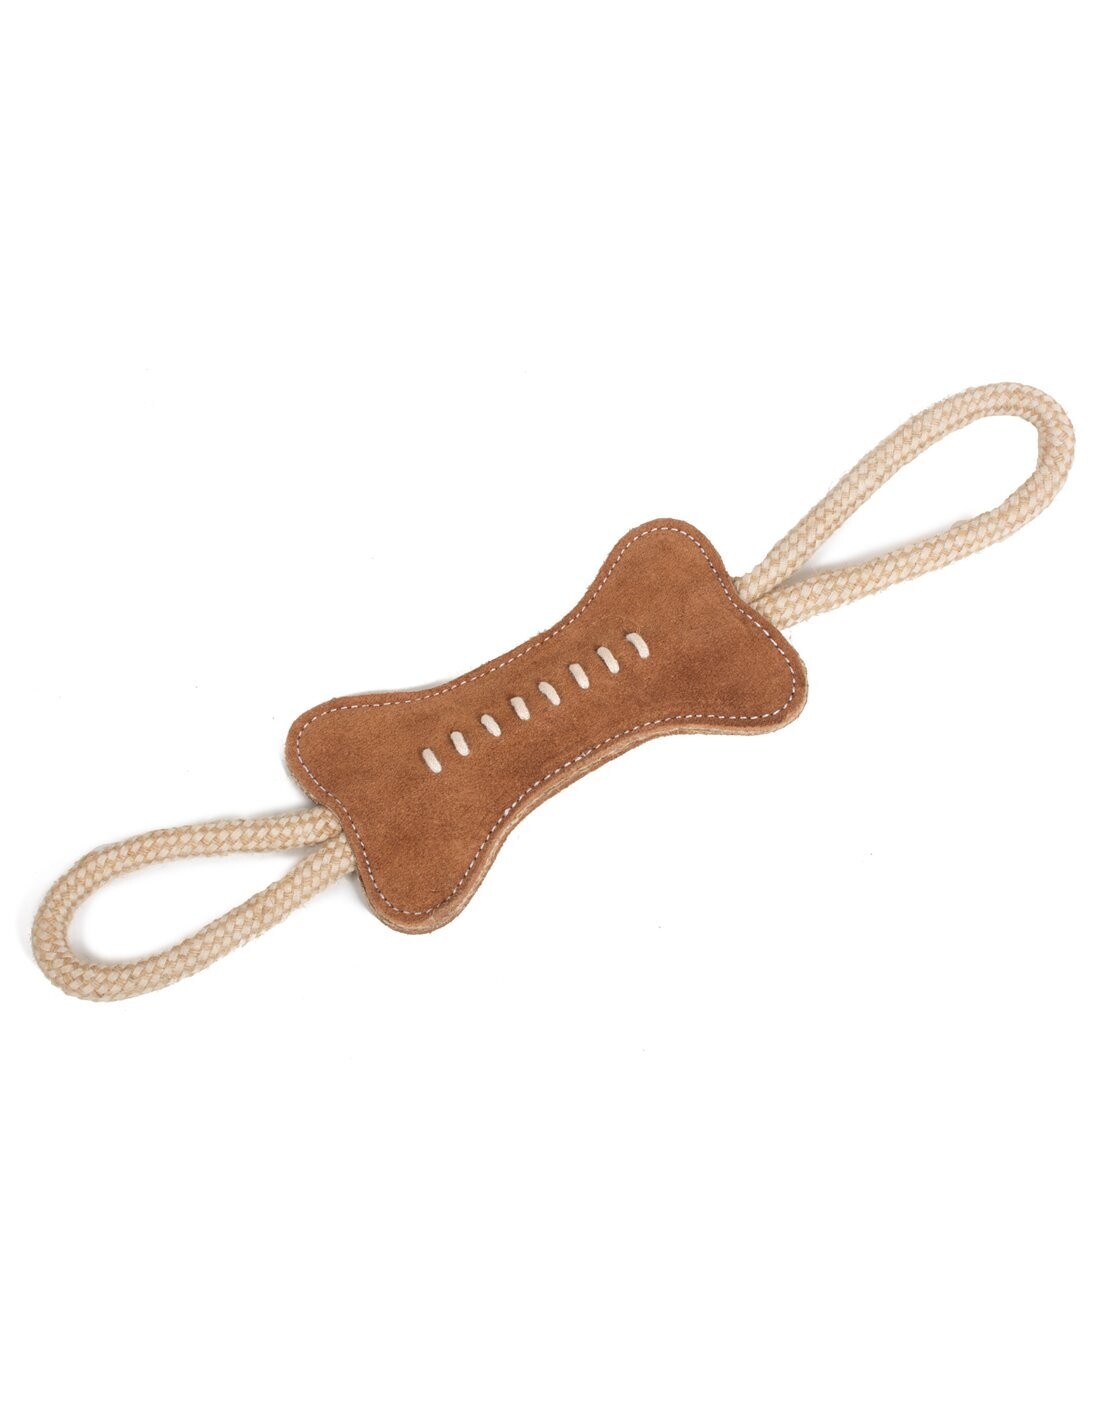 Green Suede Leather Bone Natural Toys pack of 6 - Stock